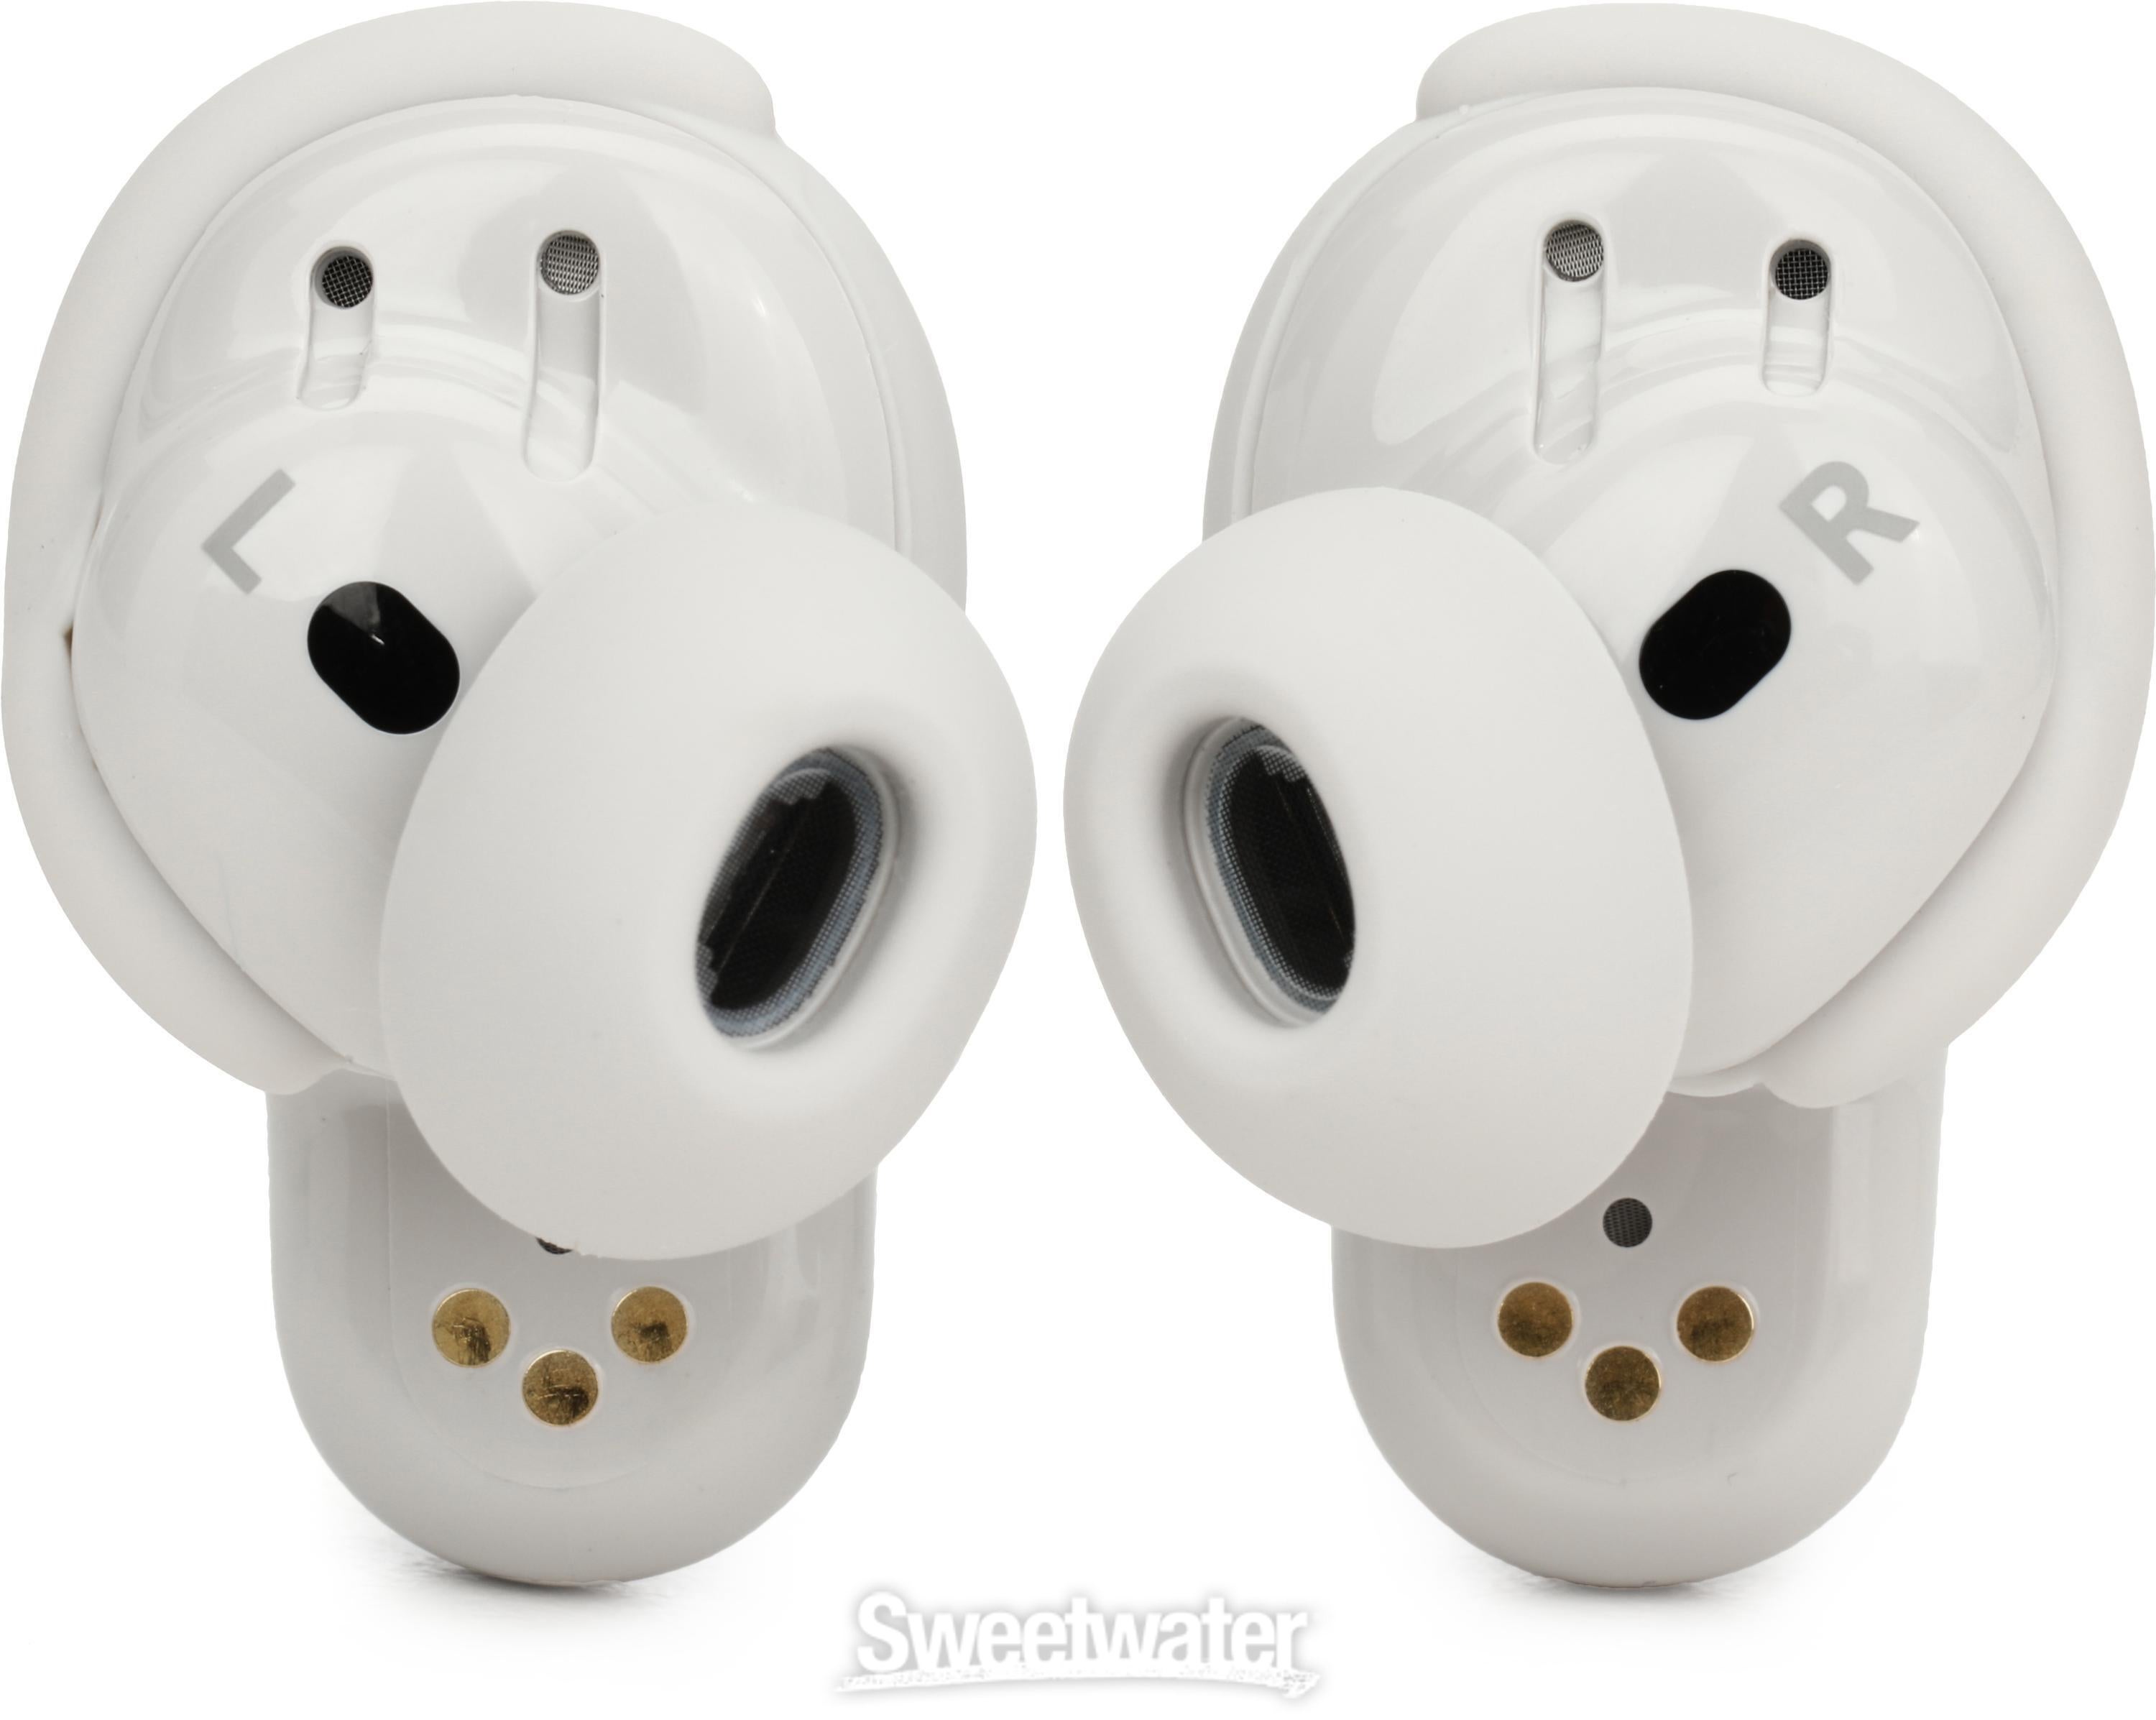 Bose QuietComfort Ultra Earbuds - White | Sweetwater